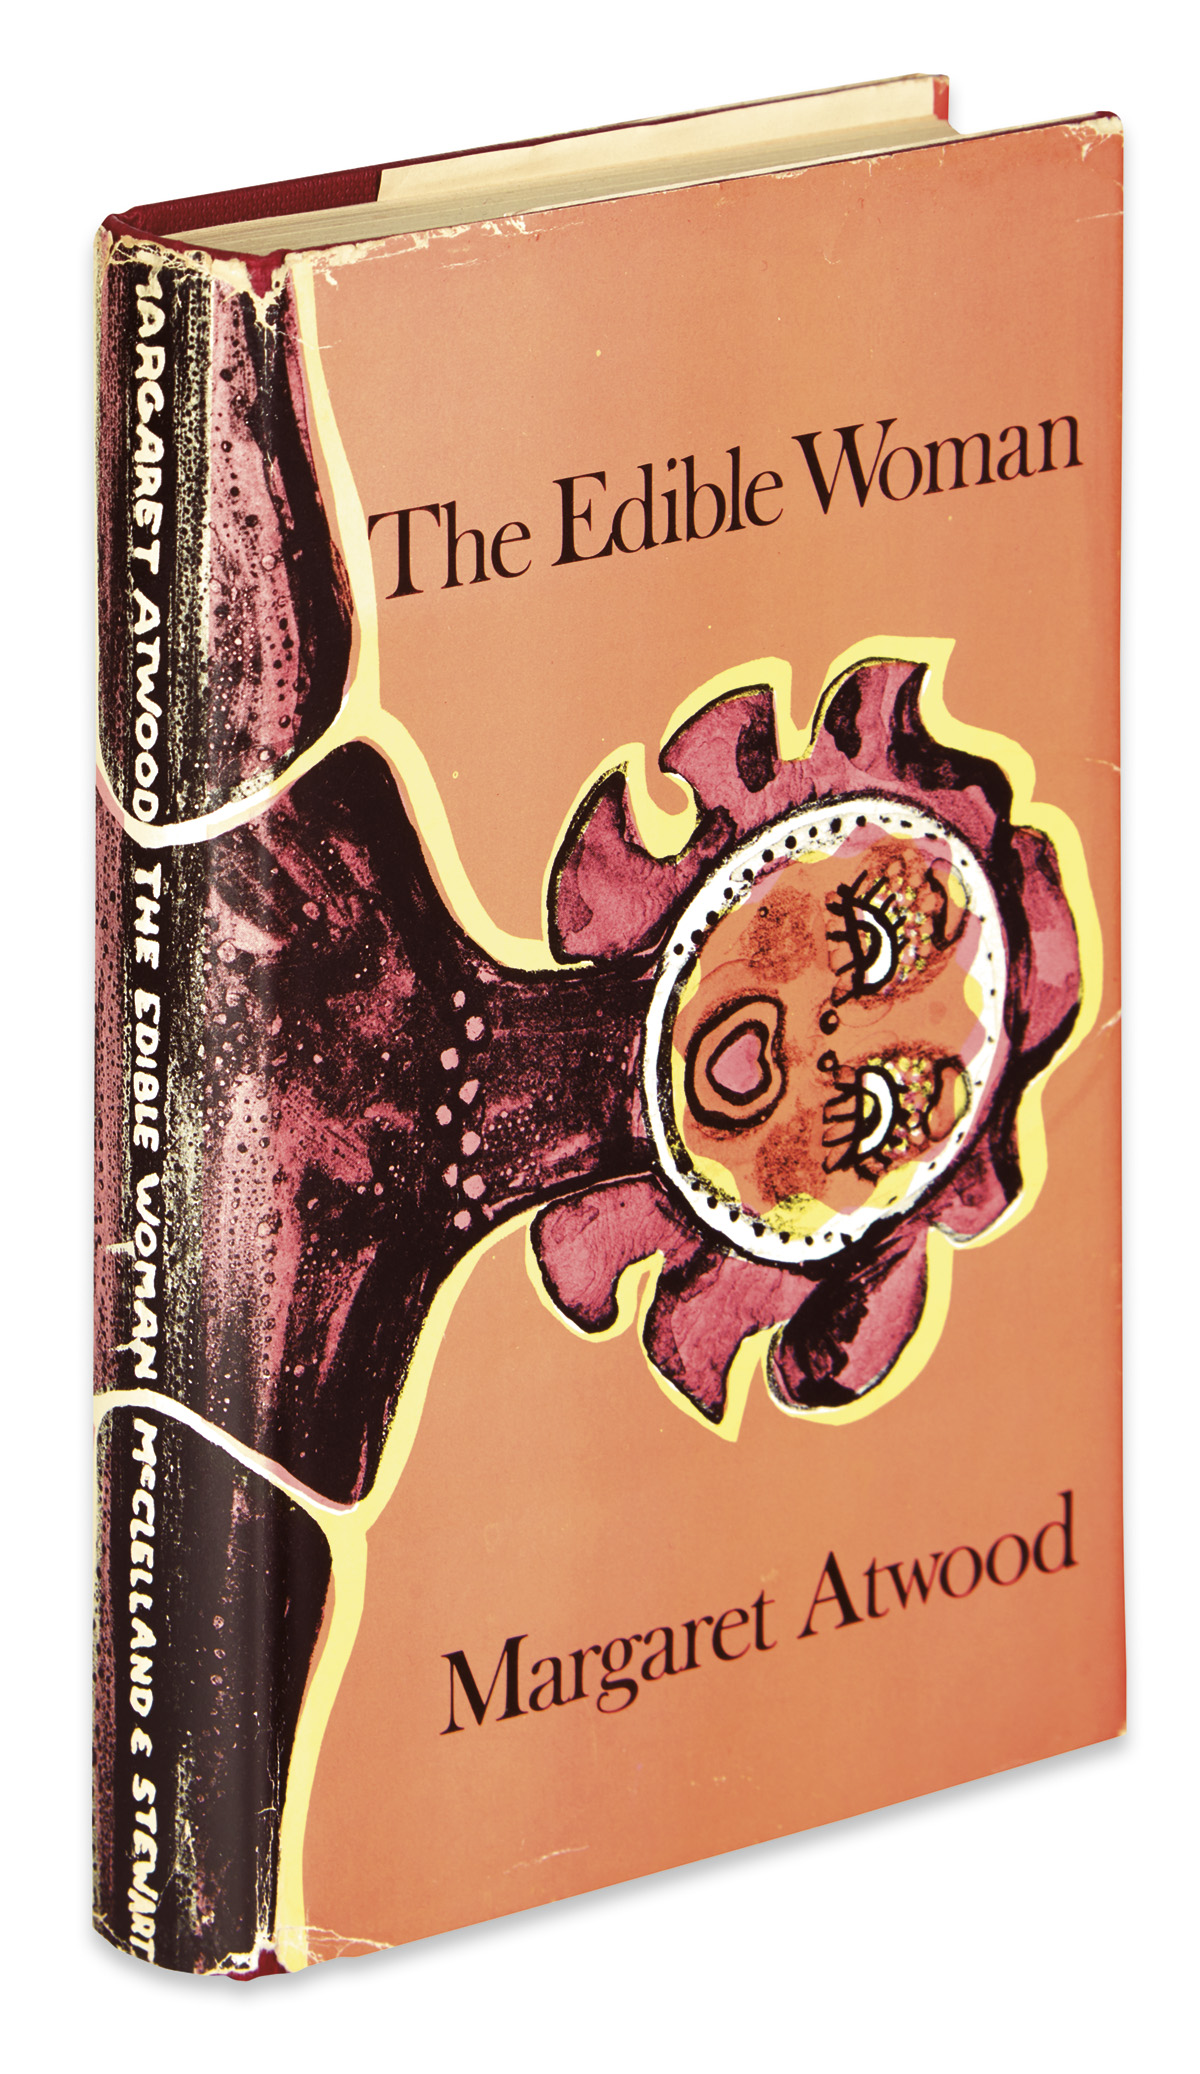 The Edible Woman by Margaret Atwood - Her use of socially conscious themes  and her investigation of - Studocu